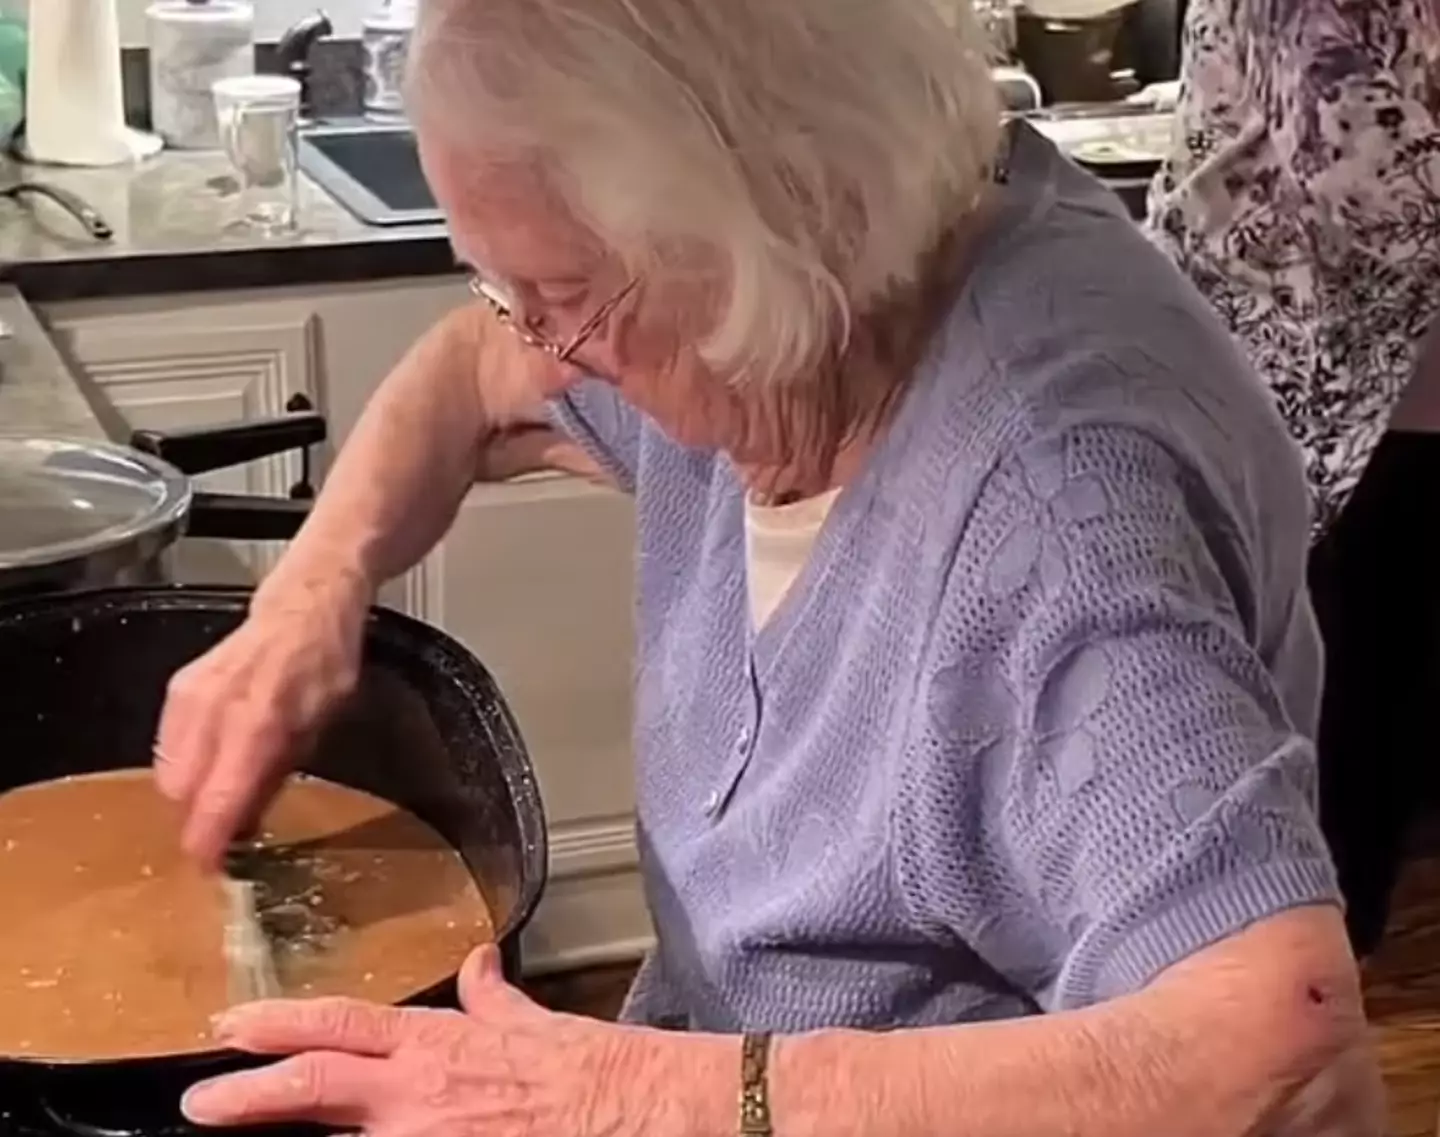 The 100-year-old does all of her own cooking and prefers a colourful plate (Fox29)